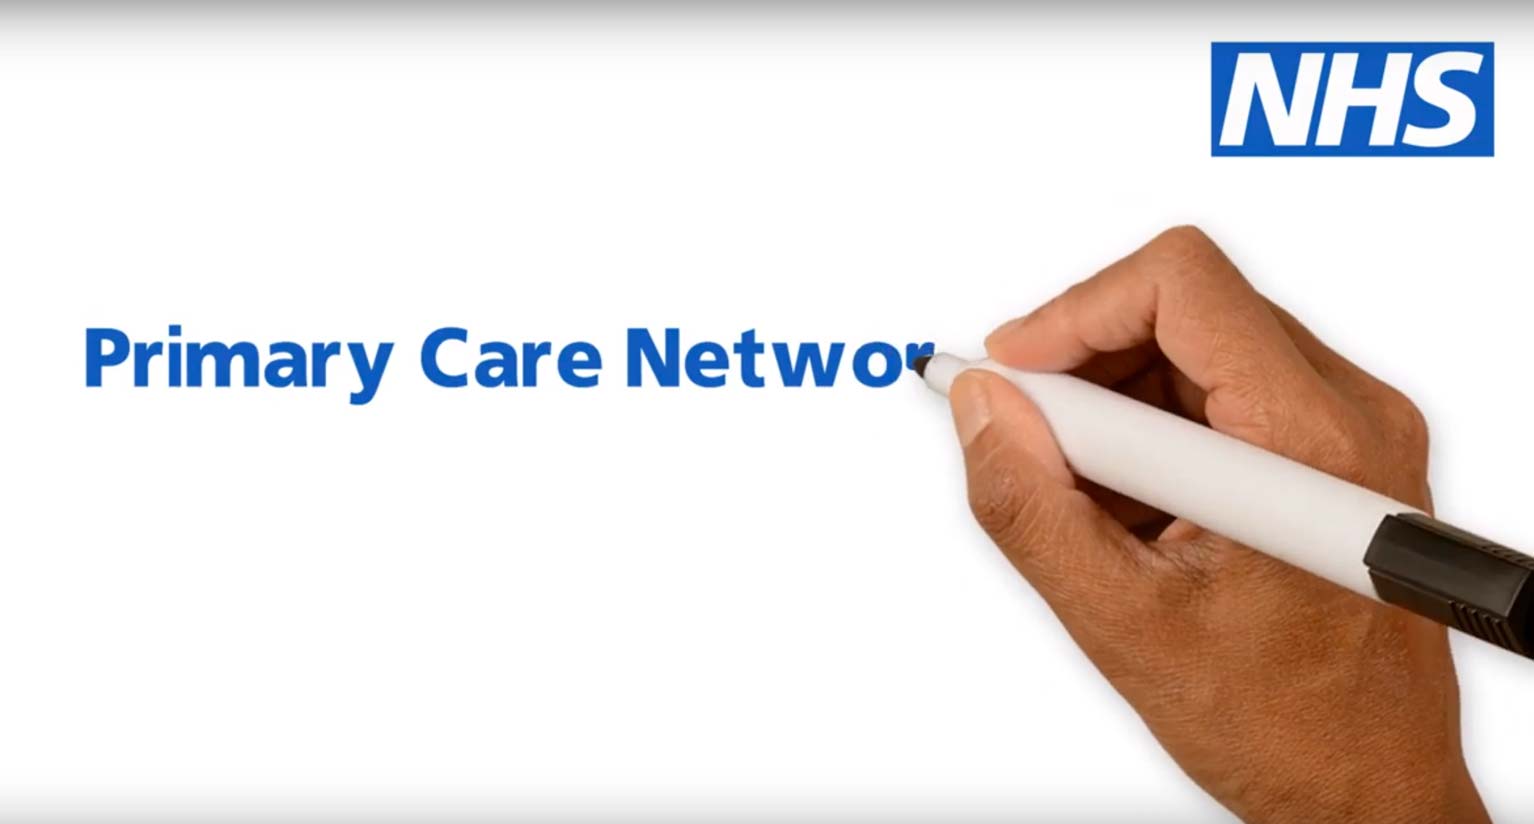 NHS Primary Care Network